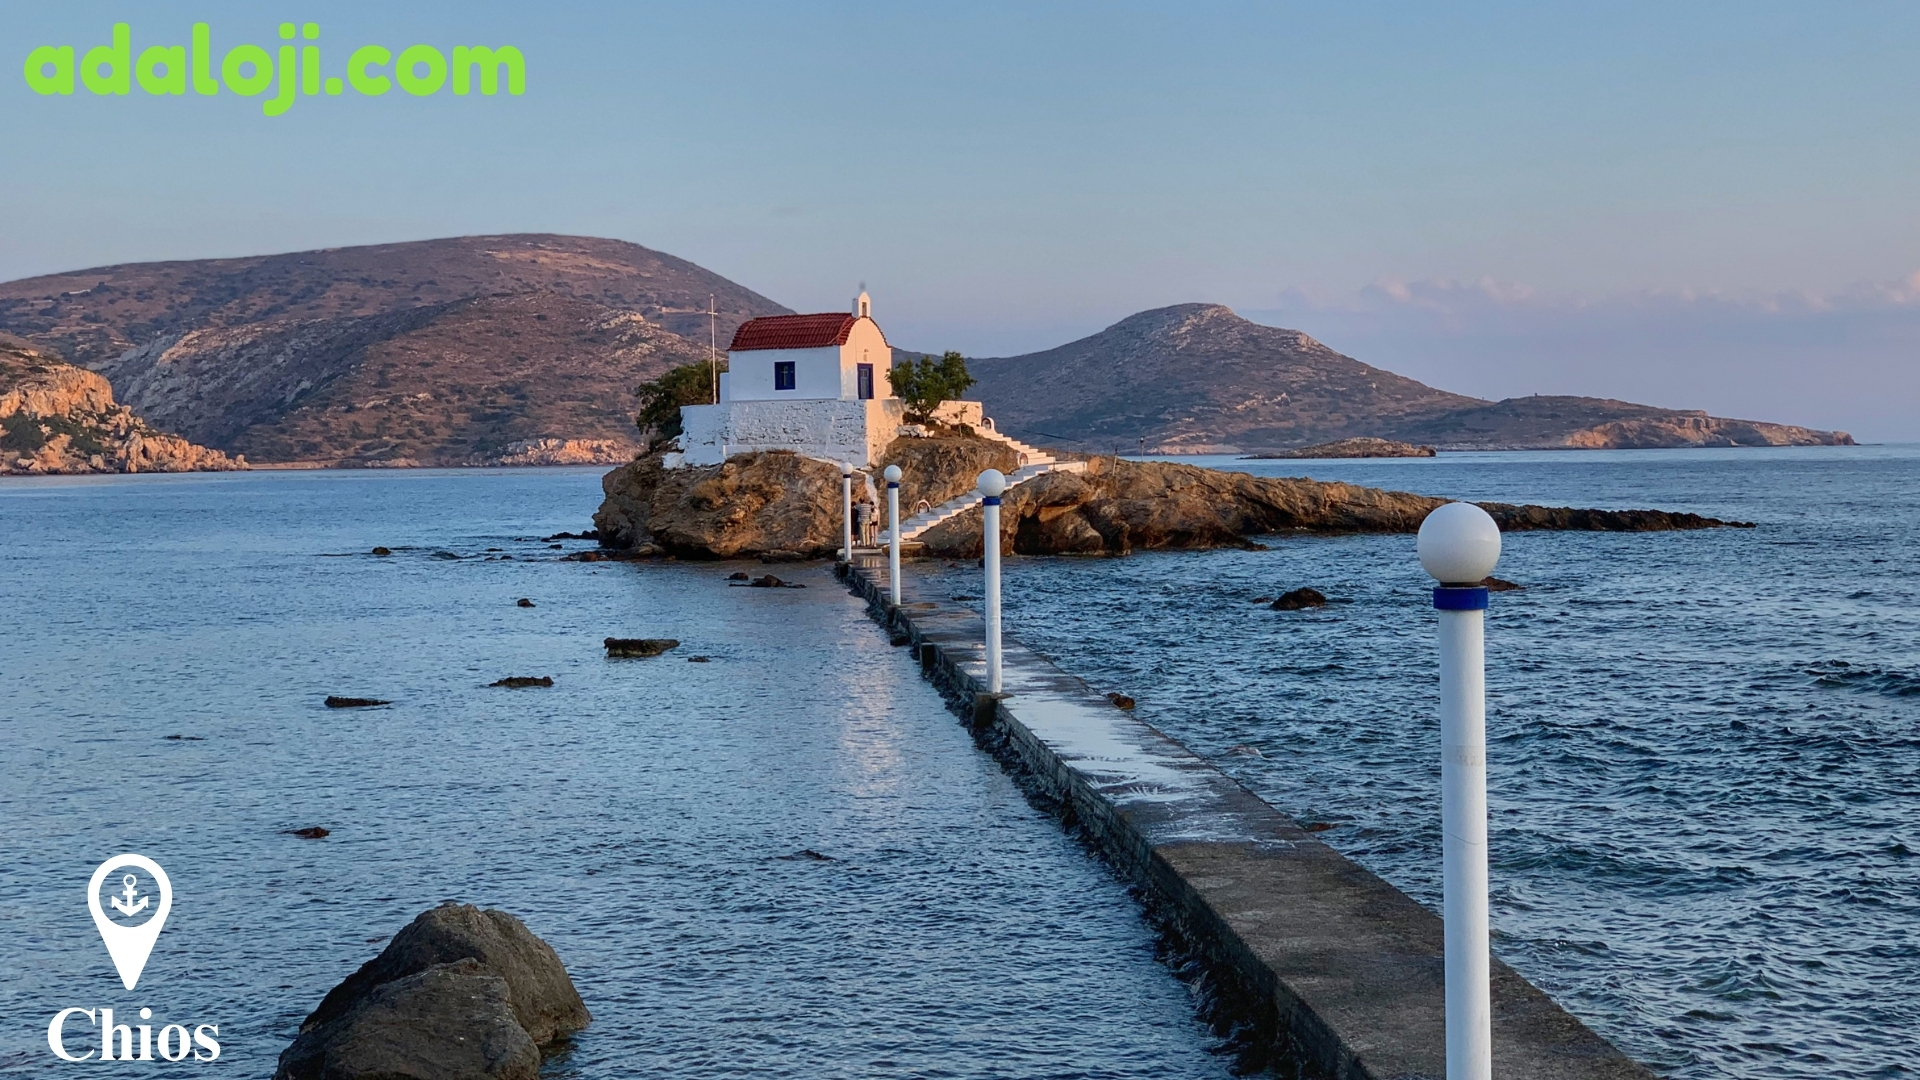 Chios - Your Gateway to the Aegean Sea.